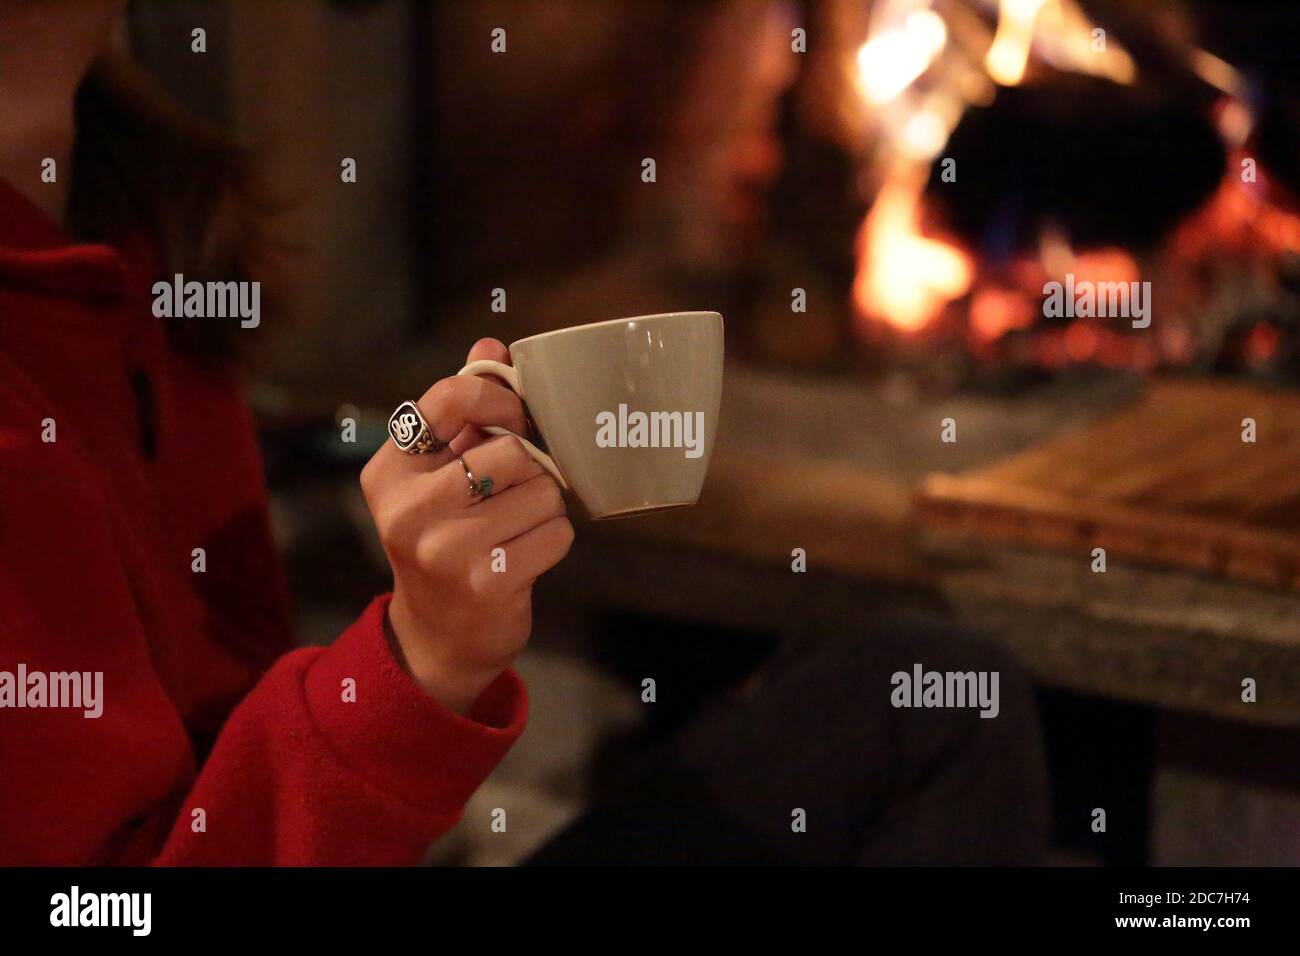 Girl's hand holding a cup with fireplace in the background Stock Photo